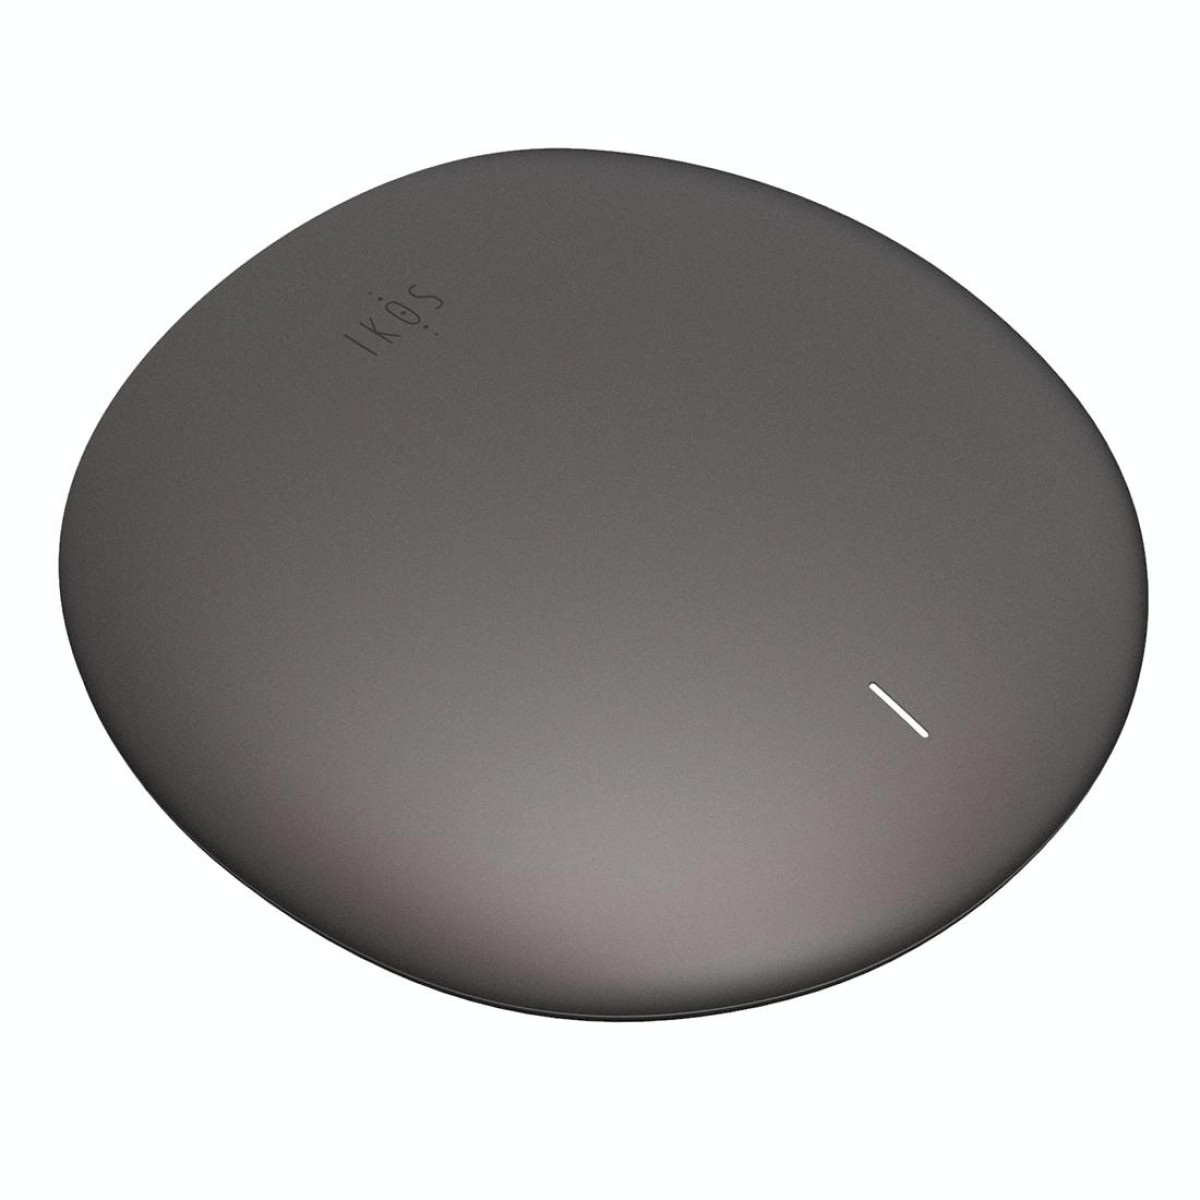 IKOS W3600-4G 3 SIM 3 Standby Roaming-free Aboard WiFi Router for iOS / Android Phone